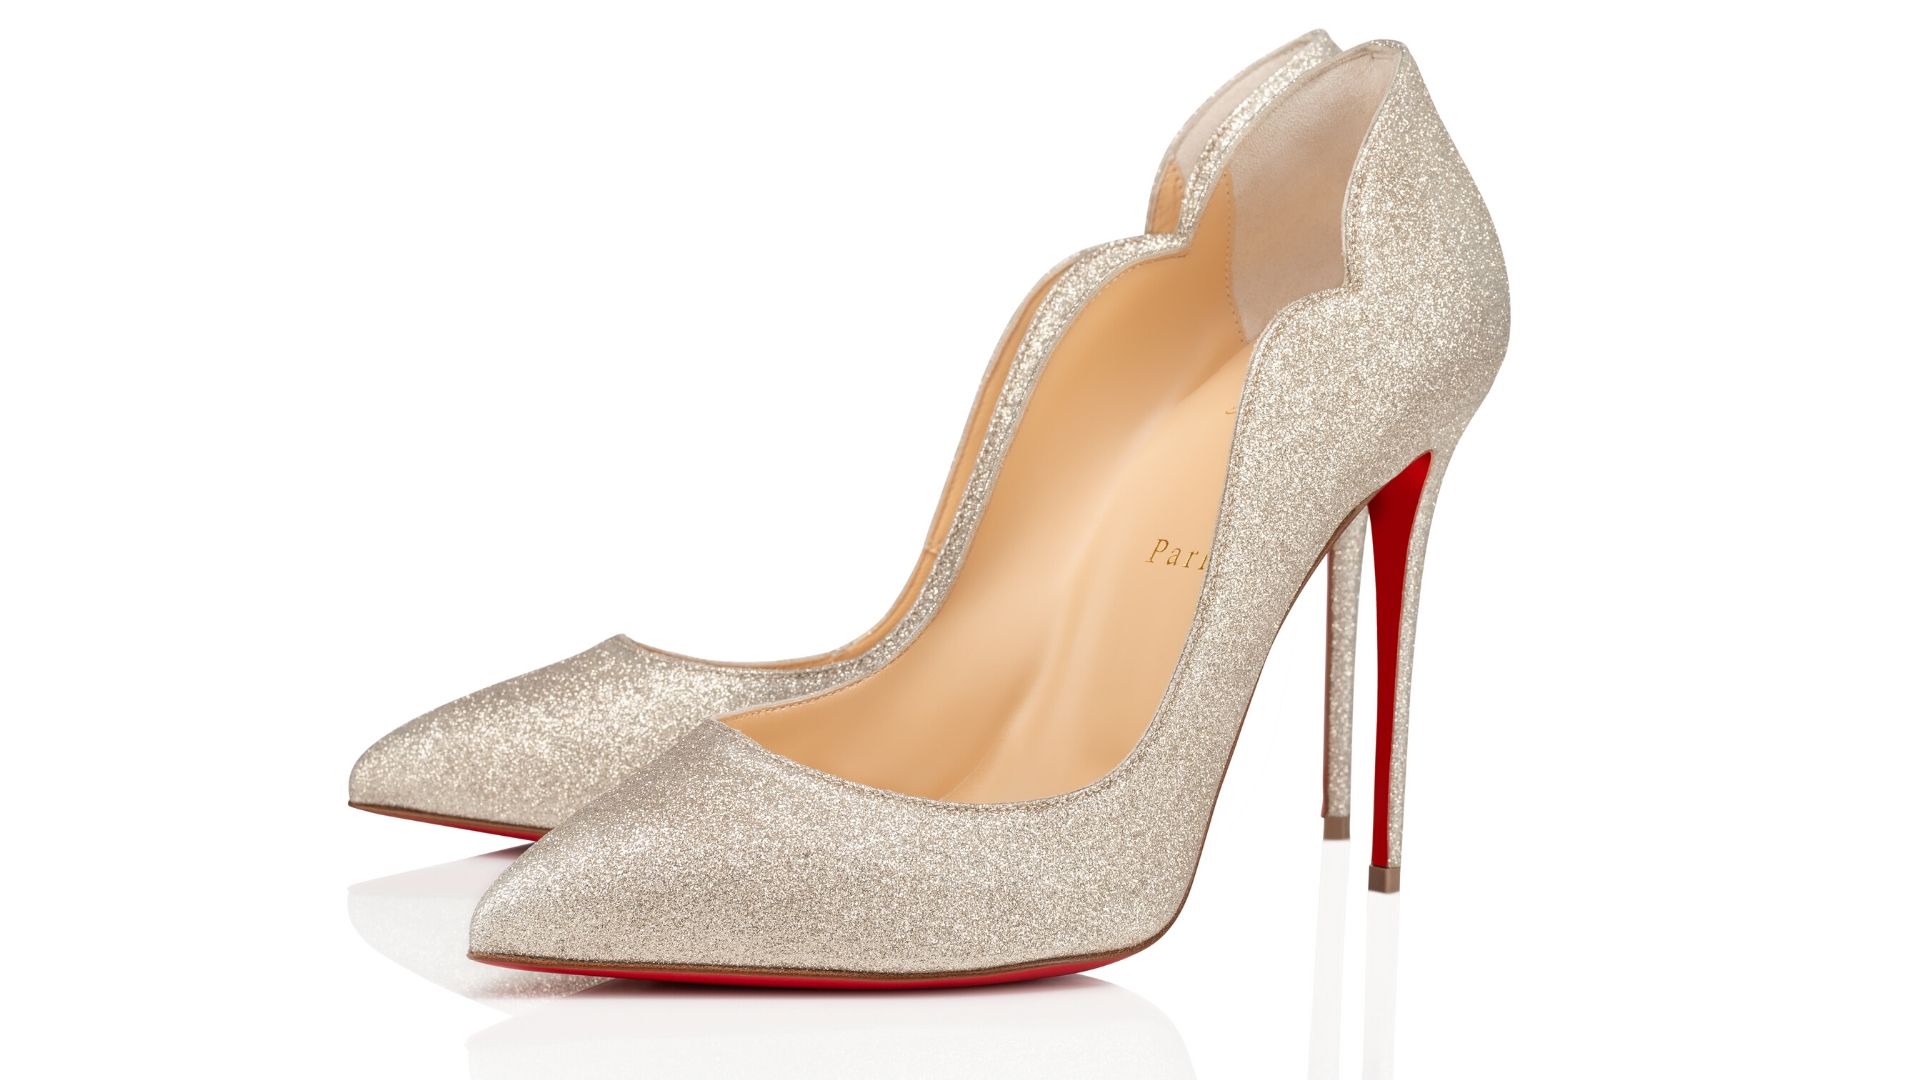 Christian Louboutins Ss20 Bridal Collection Will Have You Falling Head Over Heels Harpers